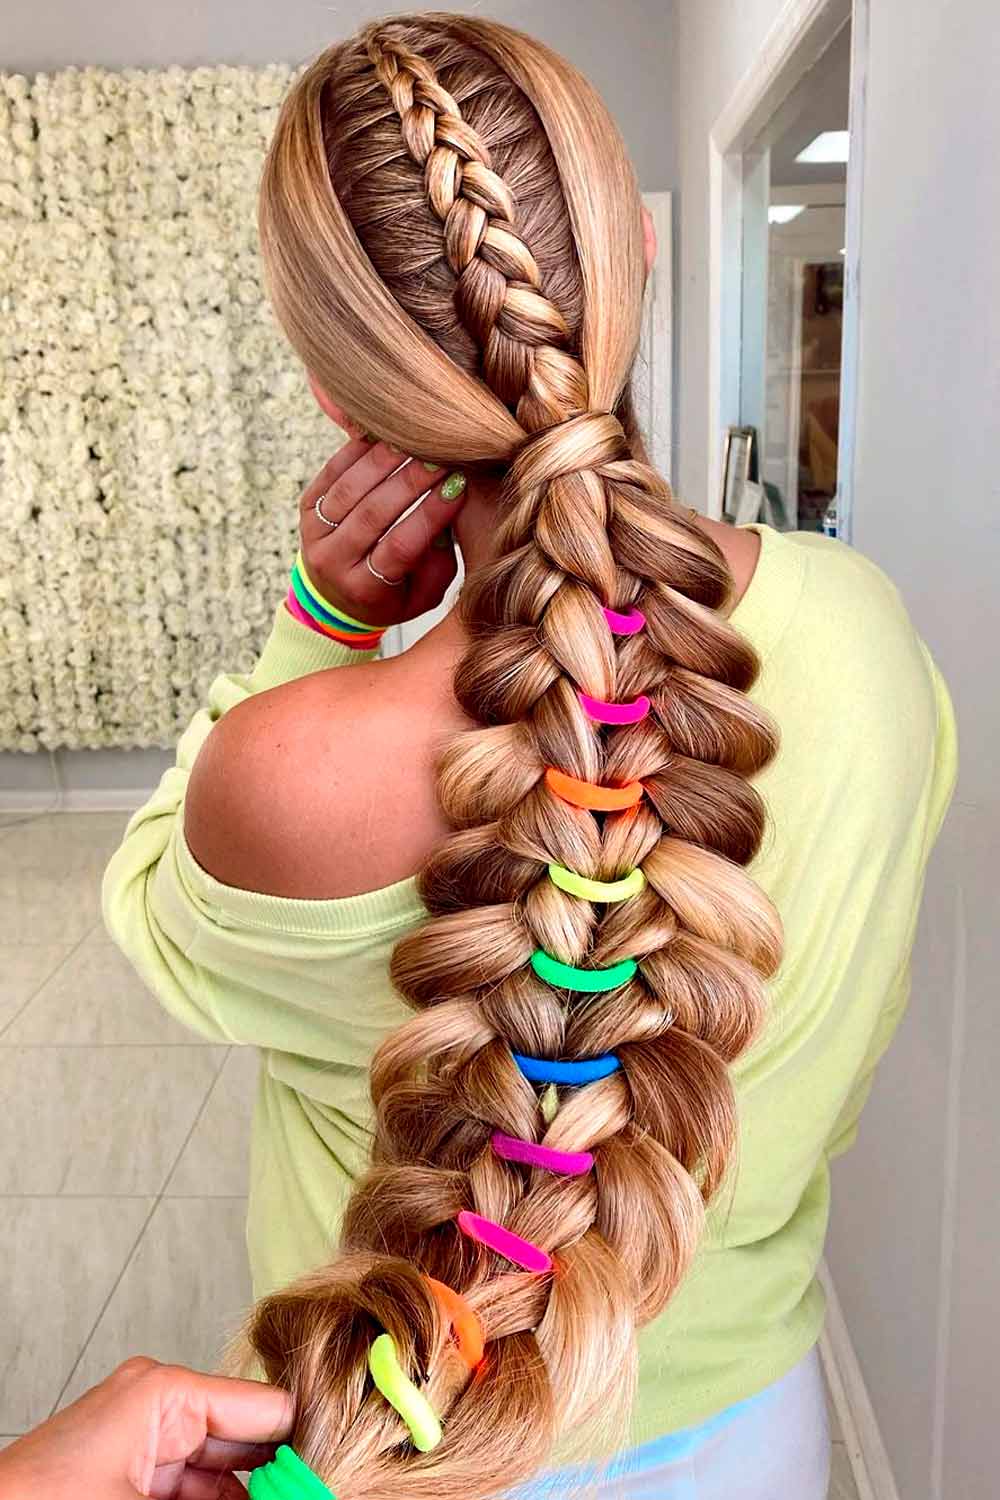 Braid with Colorful Rubber Bands #braidedhairstyles #braids